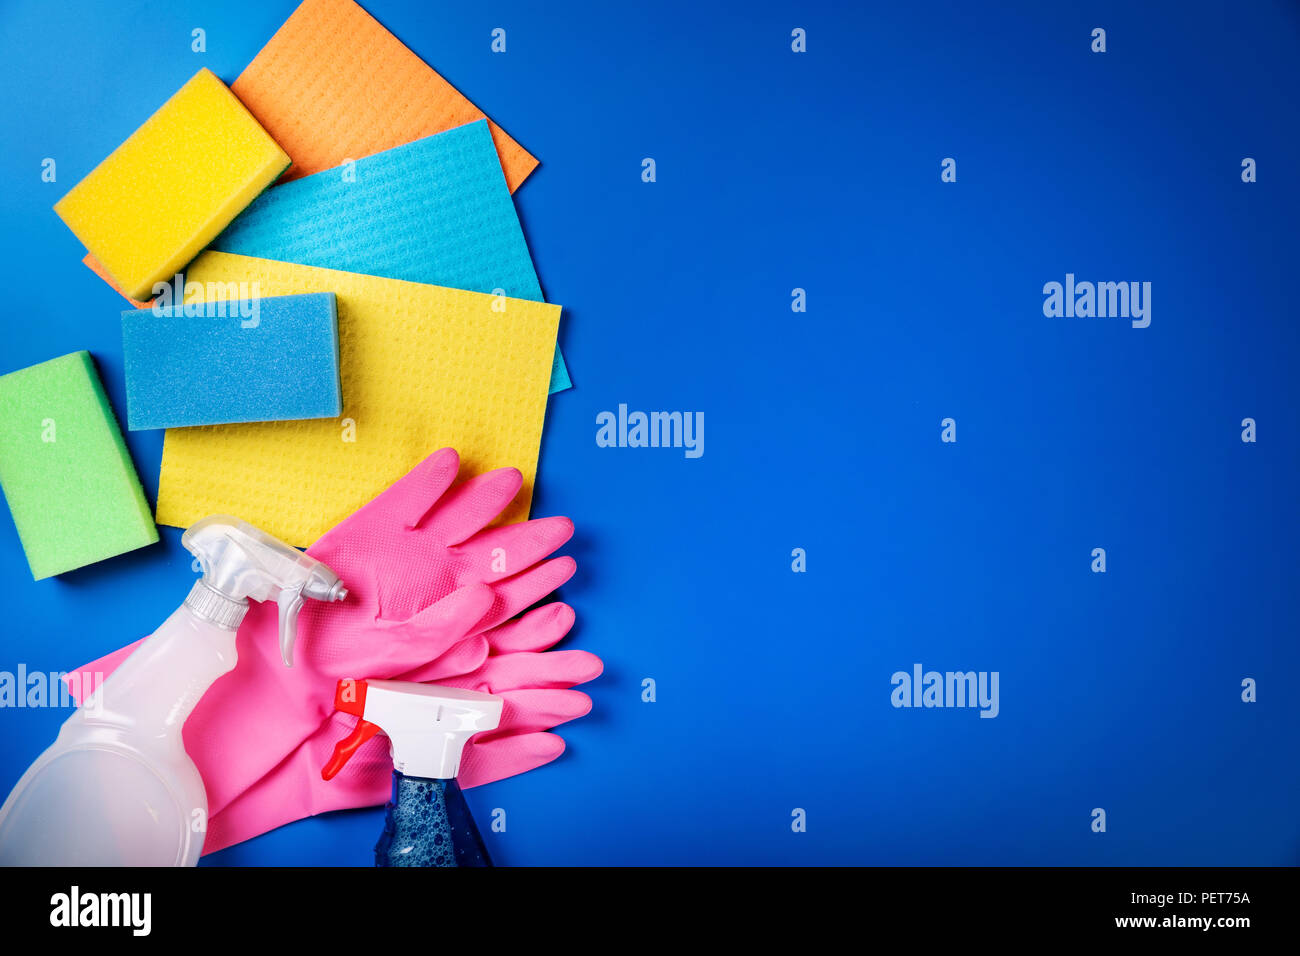 cleaning equipment on blue background with copy space Stock Photo